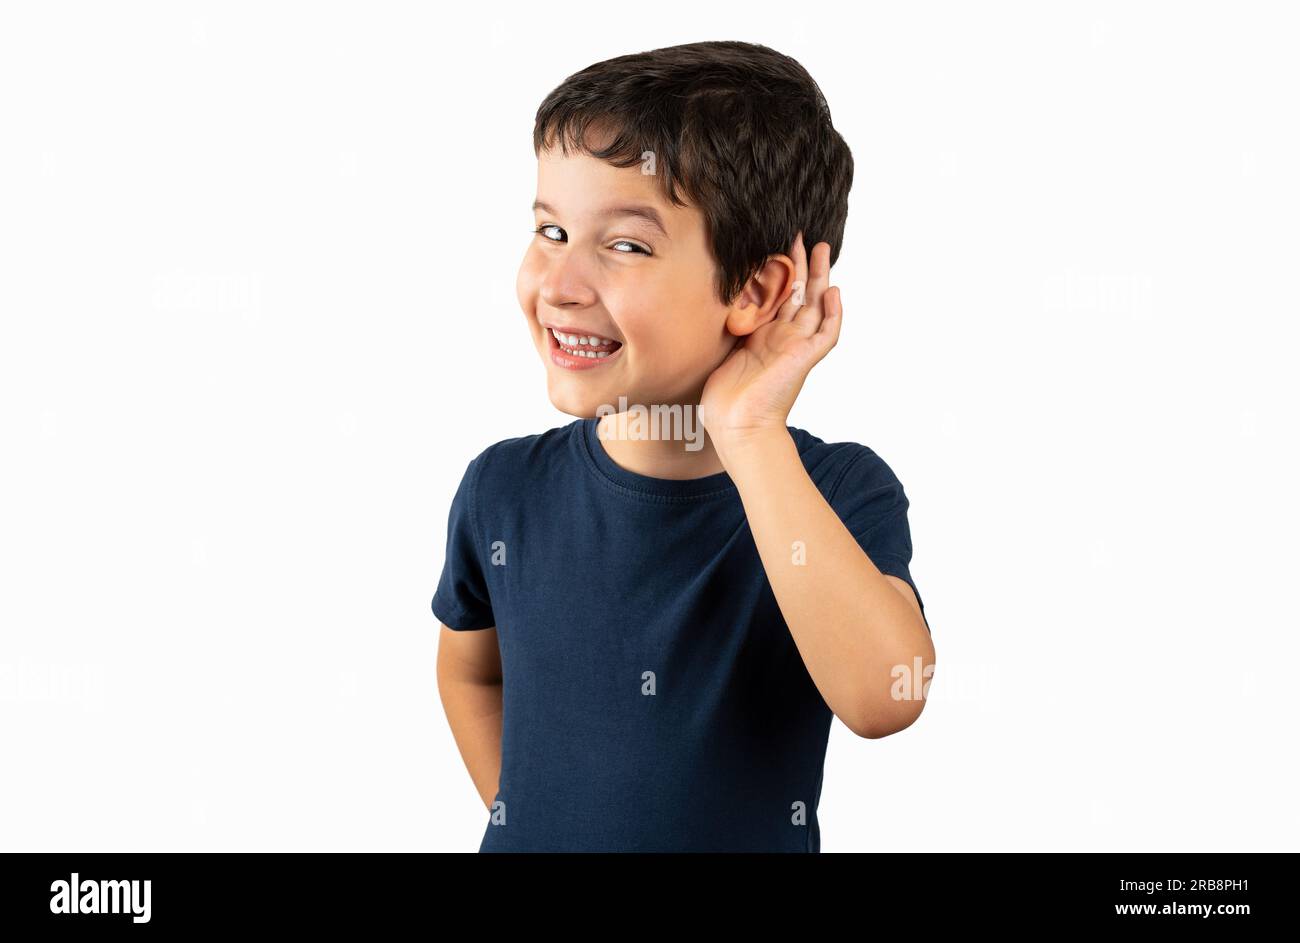 Young boy over isolated background smiling with hand over ear listening an hearing to rumor or gossip. Deafness concept. Stock Photo